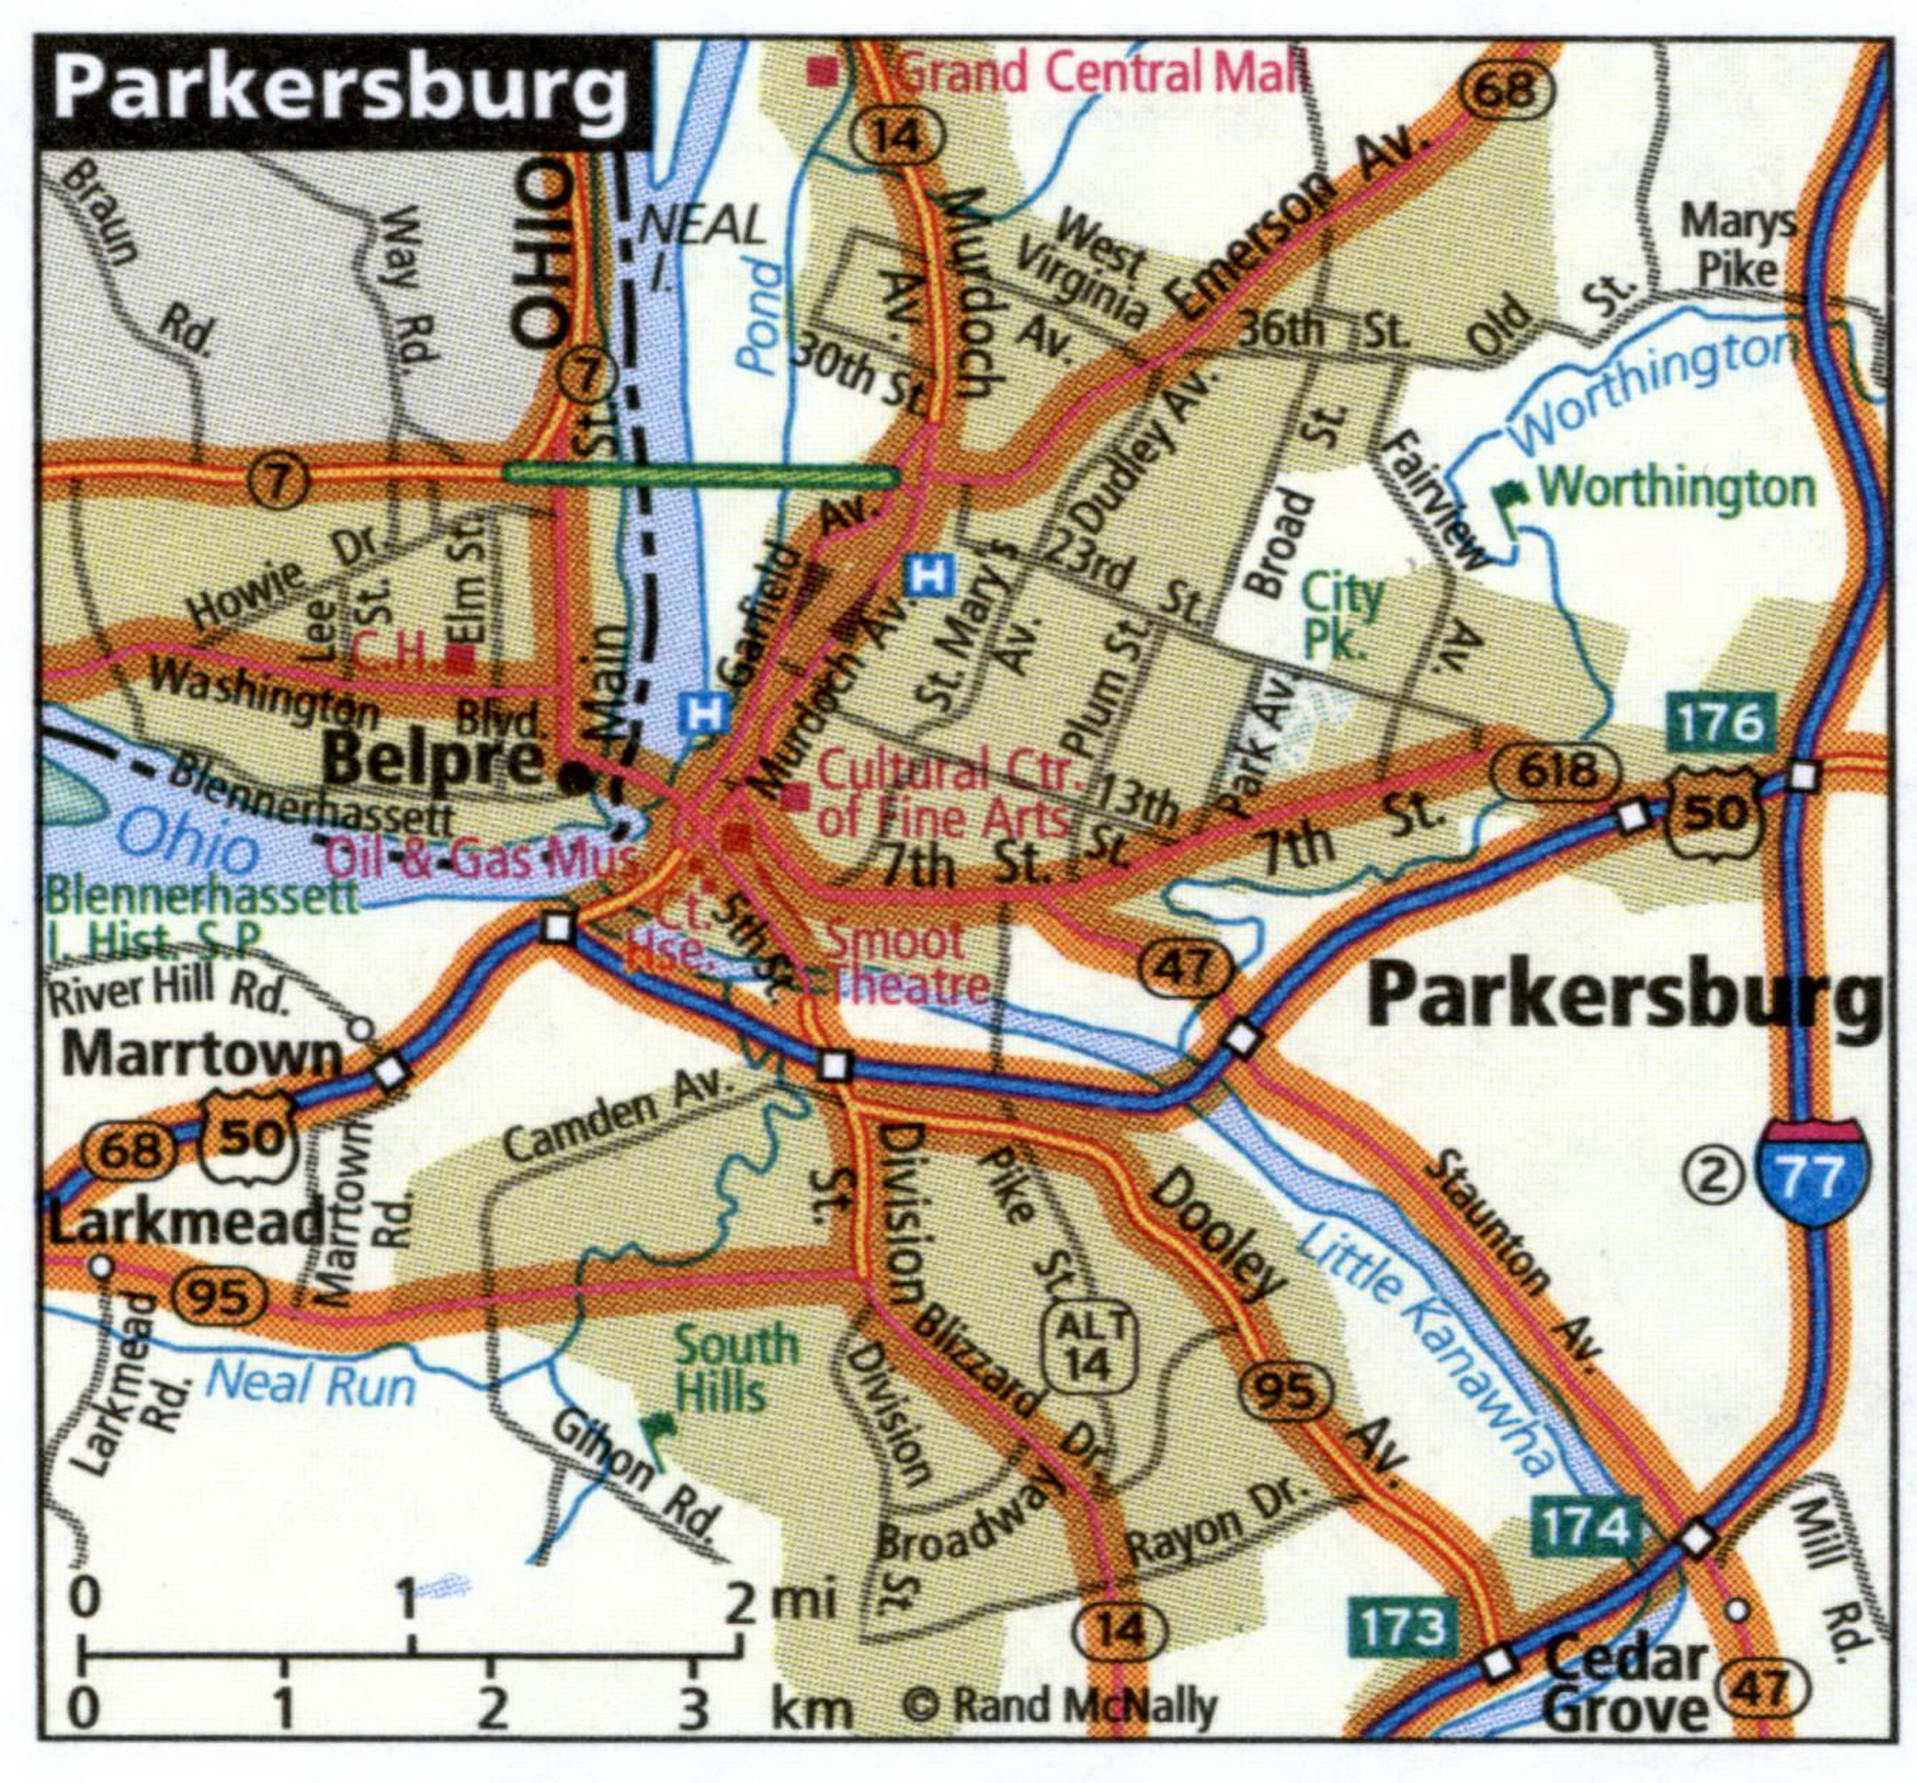 Parkersburg city map for truckers